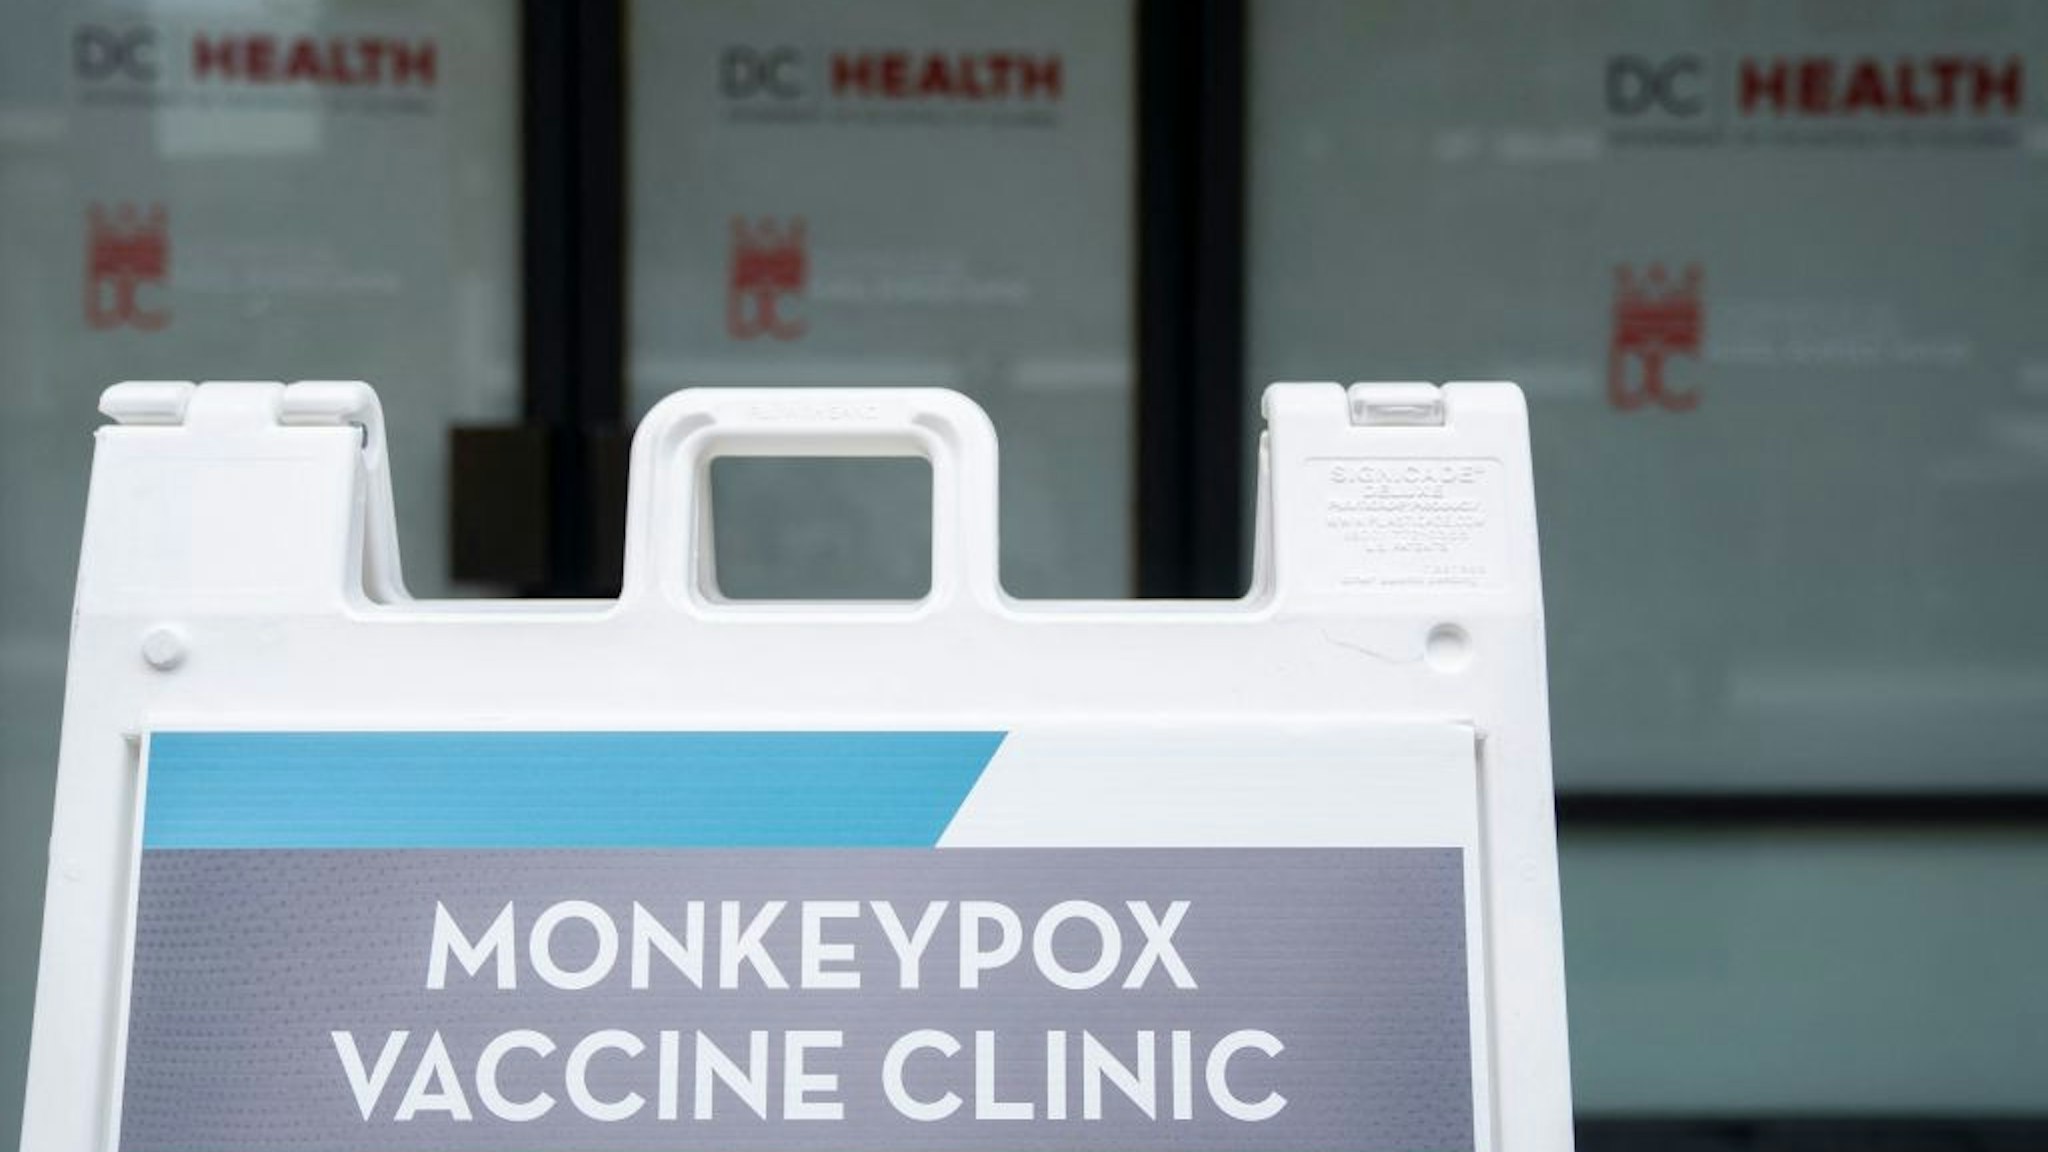 This photo taken on August 5, 2022 shows a sign for a Monkeypox vaccine clinic in Washington, DC. - US President Joe Biden's government on August 4 declared monkeypox a public health emergency, a move that should free up new funds, assist in data gathering and allow the deployment of additional personnel in the fight against the disease. (Photo by Stefani Reynolds / AFP) (Photo by STEFANI REYNOLDS/AFP via Getty Images)